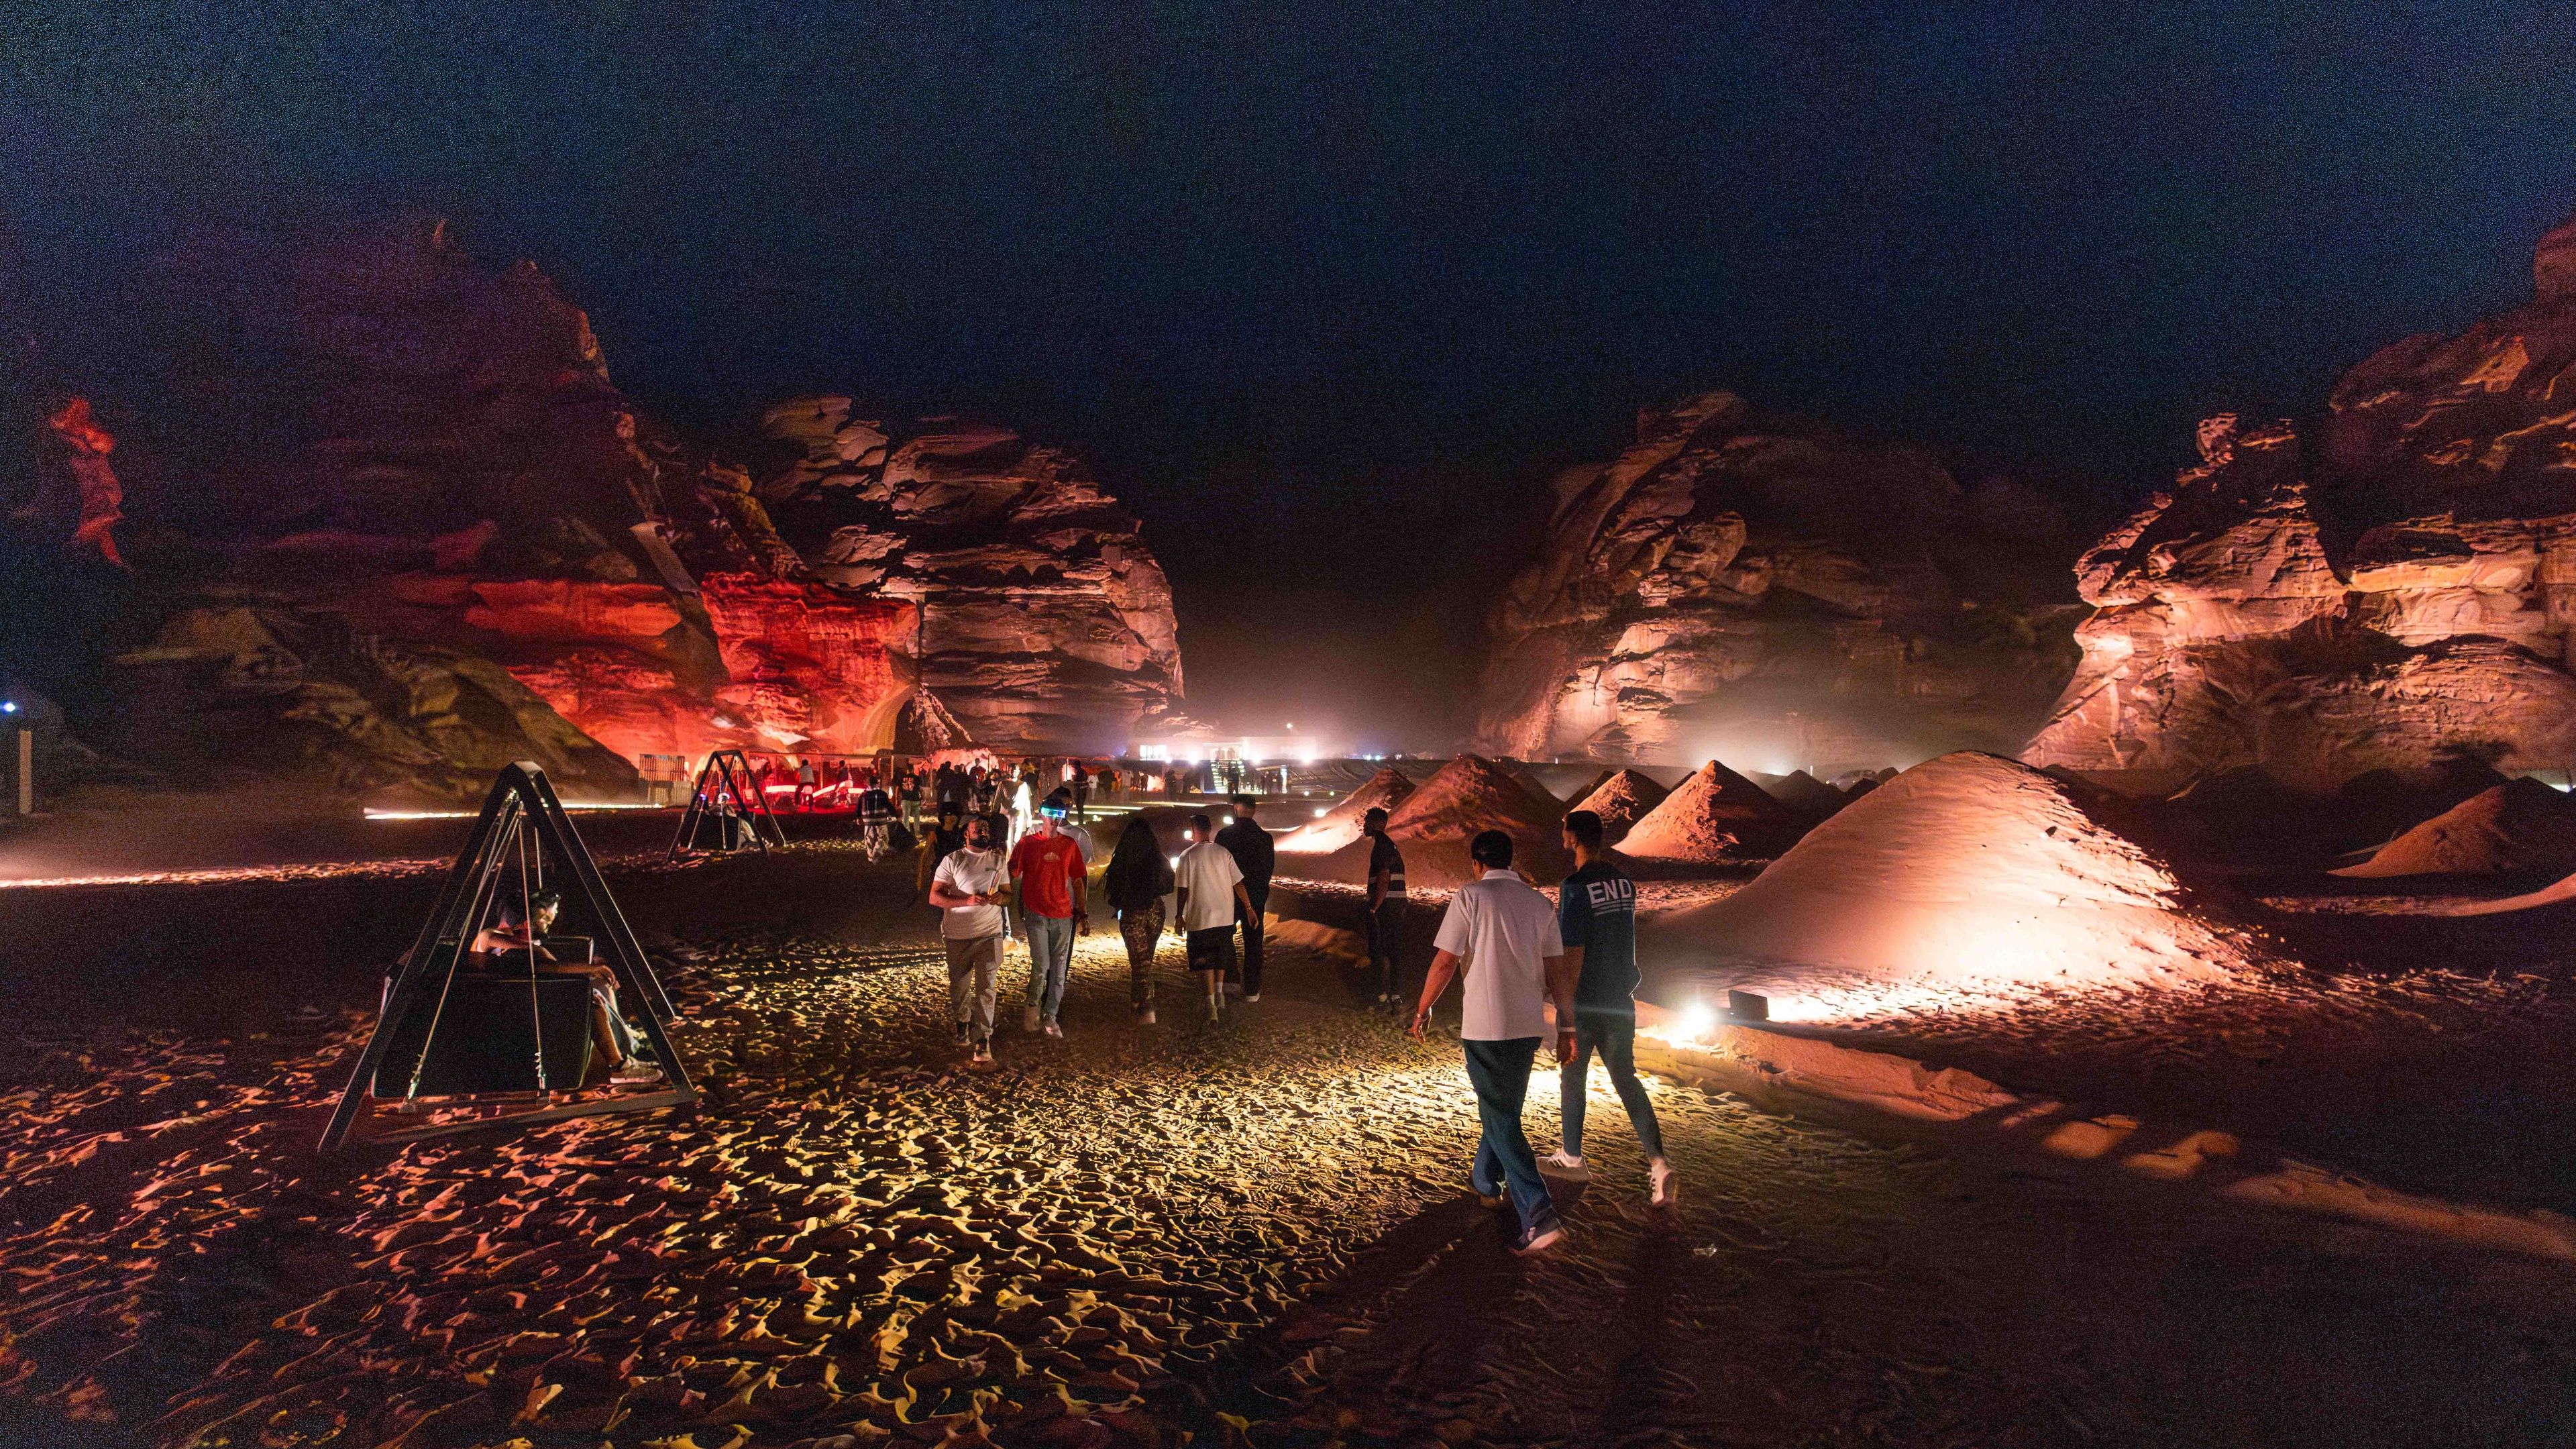 People entering festival site in the middle of the desert between rocky landscape on sand with red lighting